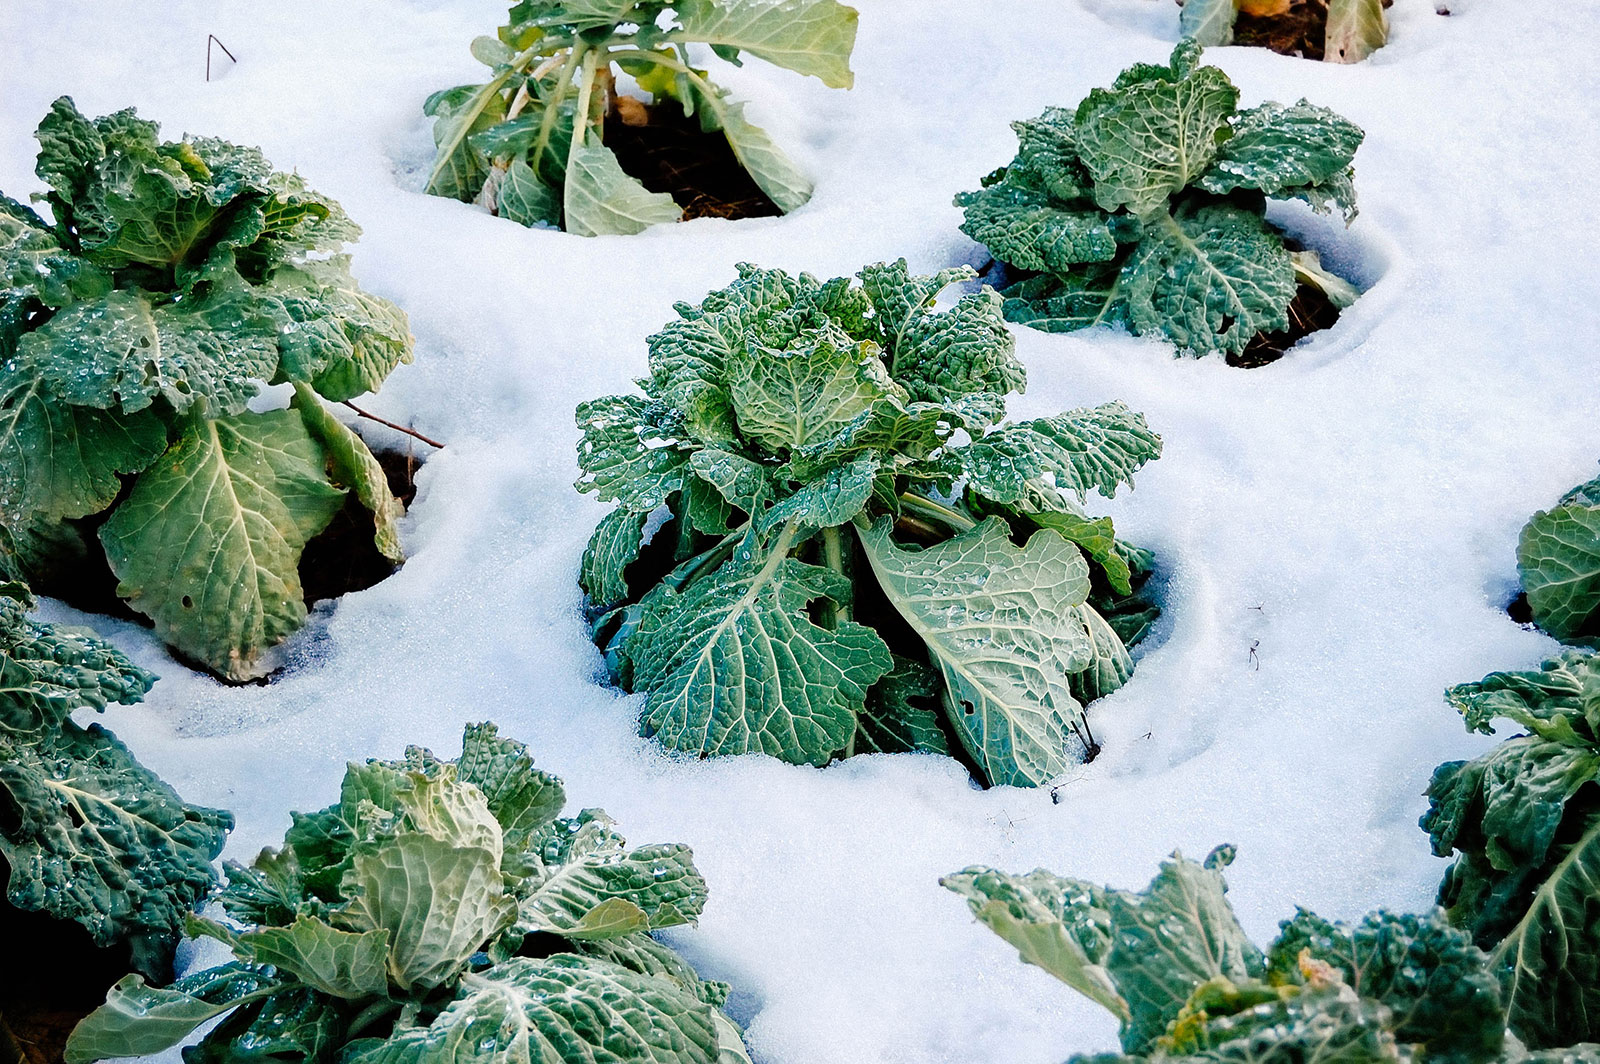 Cabbage plants surrounded by a blanket of snow